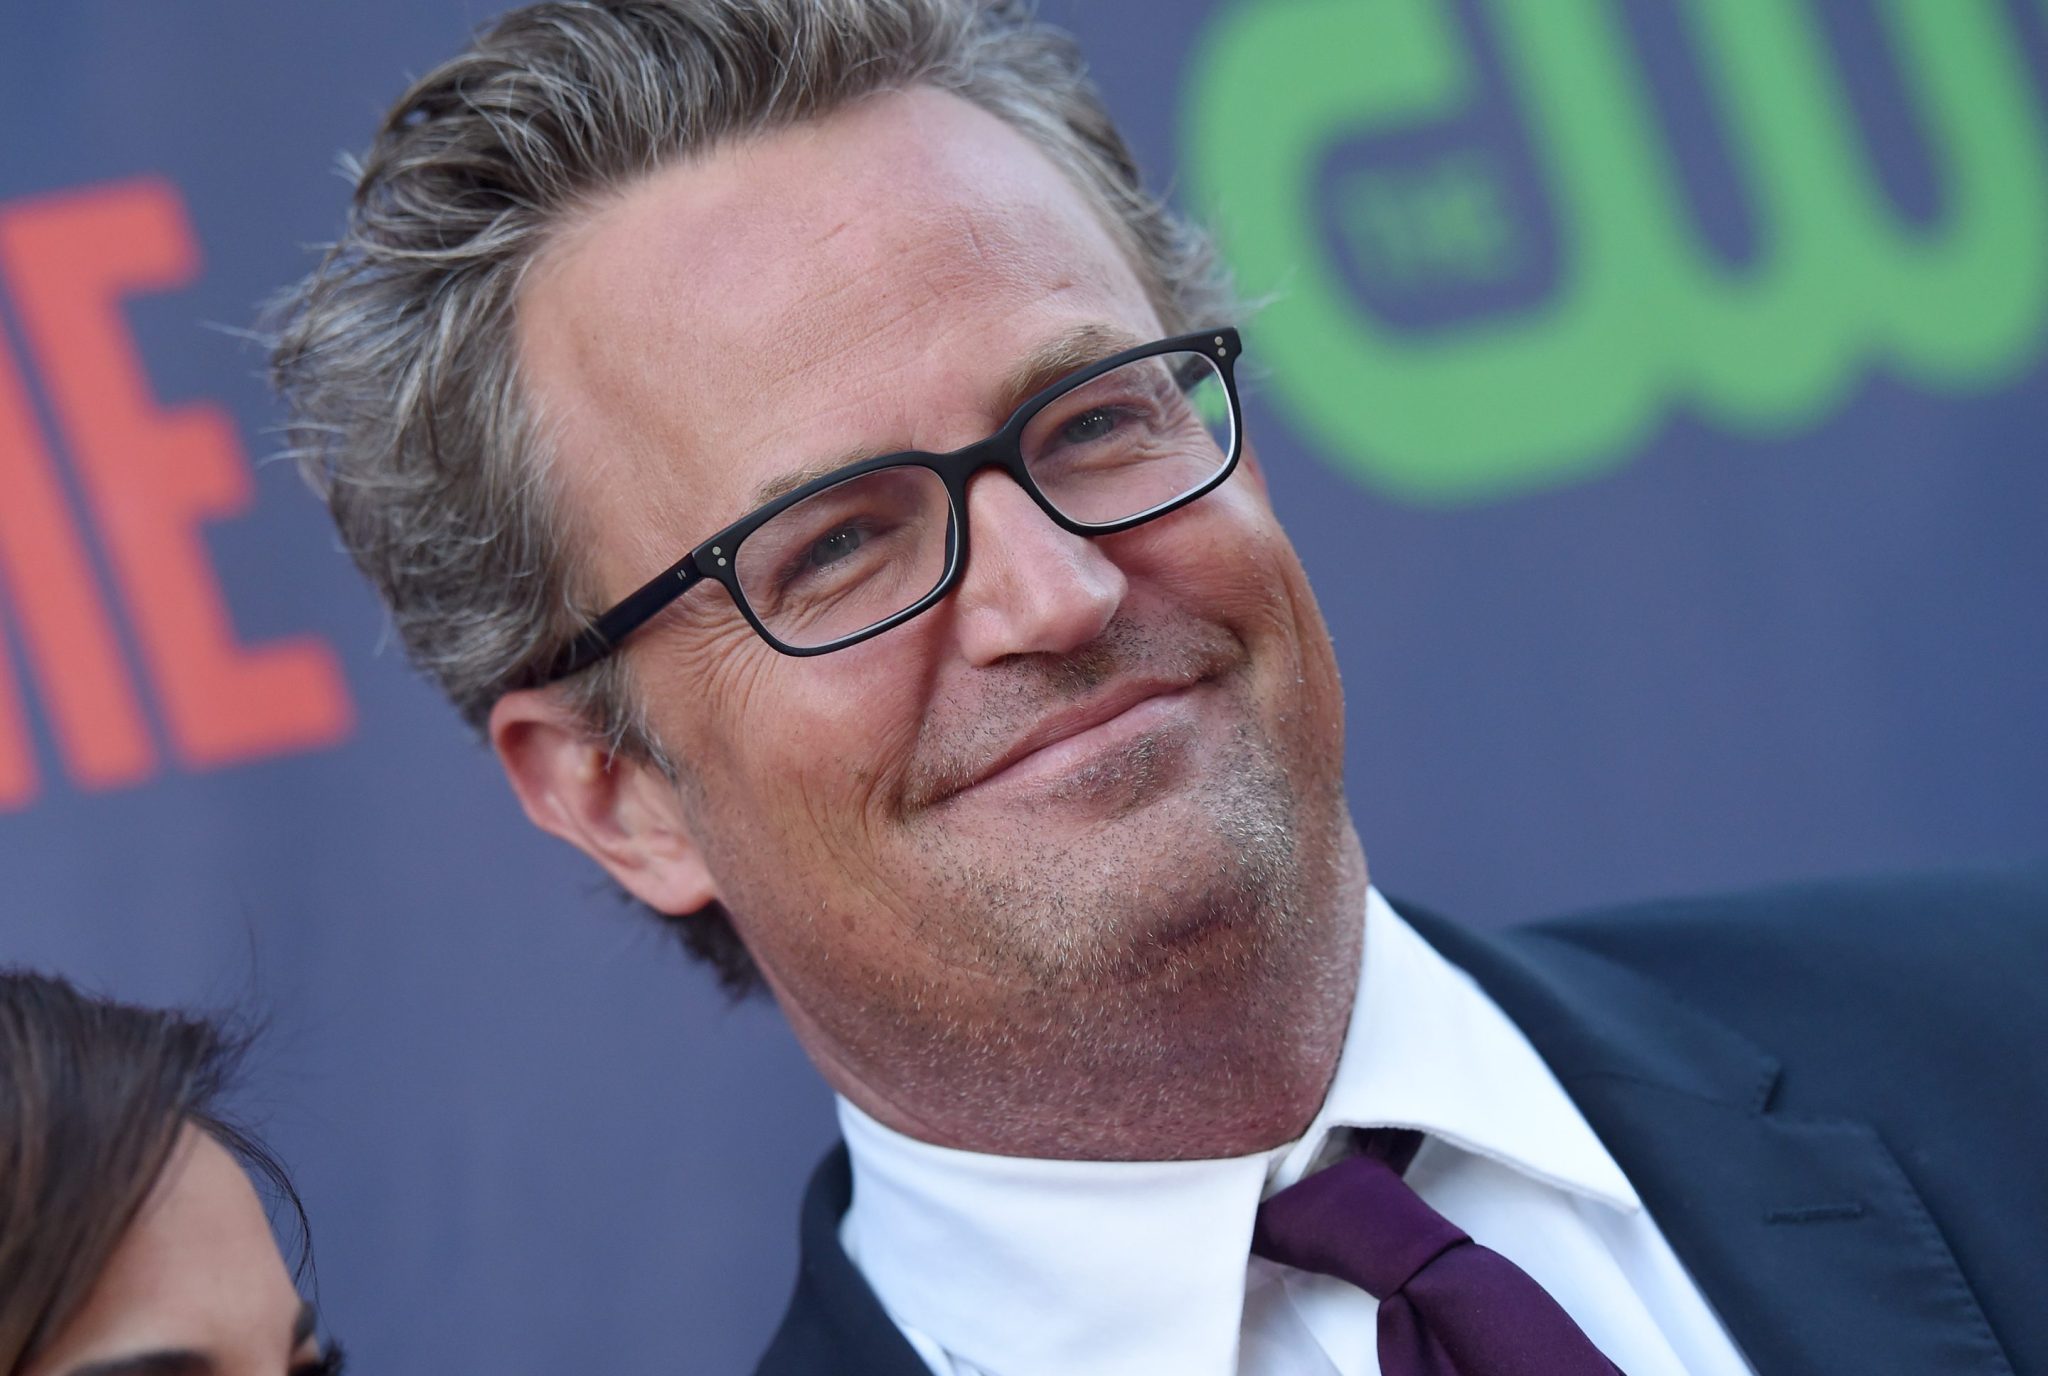 Matthew Perry Foundation is created to help combat addiction, which the late ‘Friends’ star publicly struggled with for years